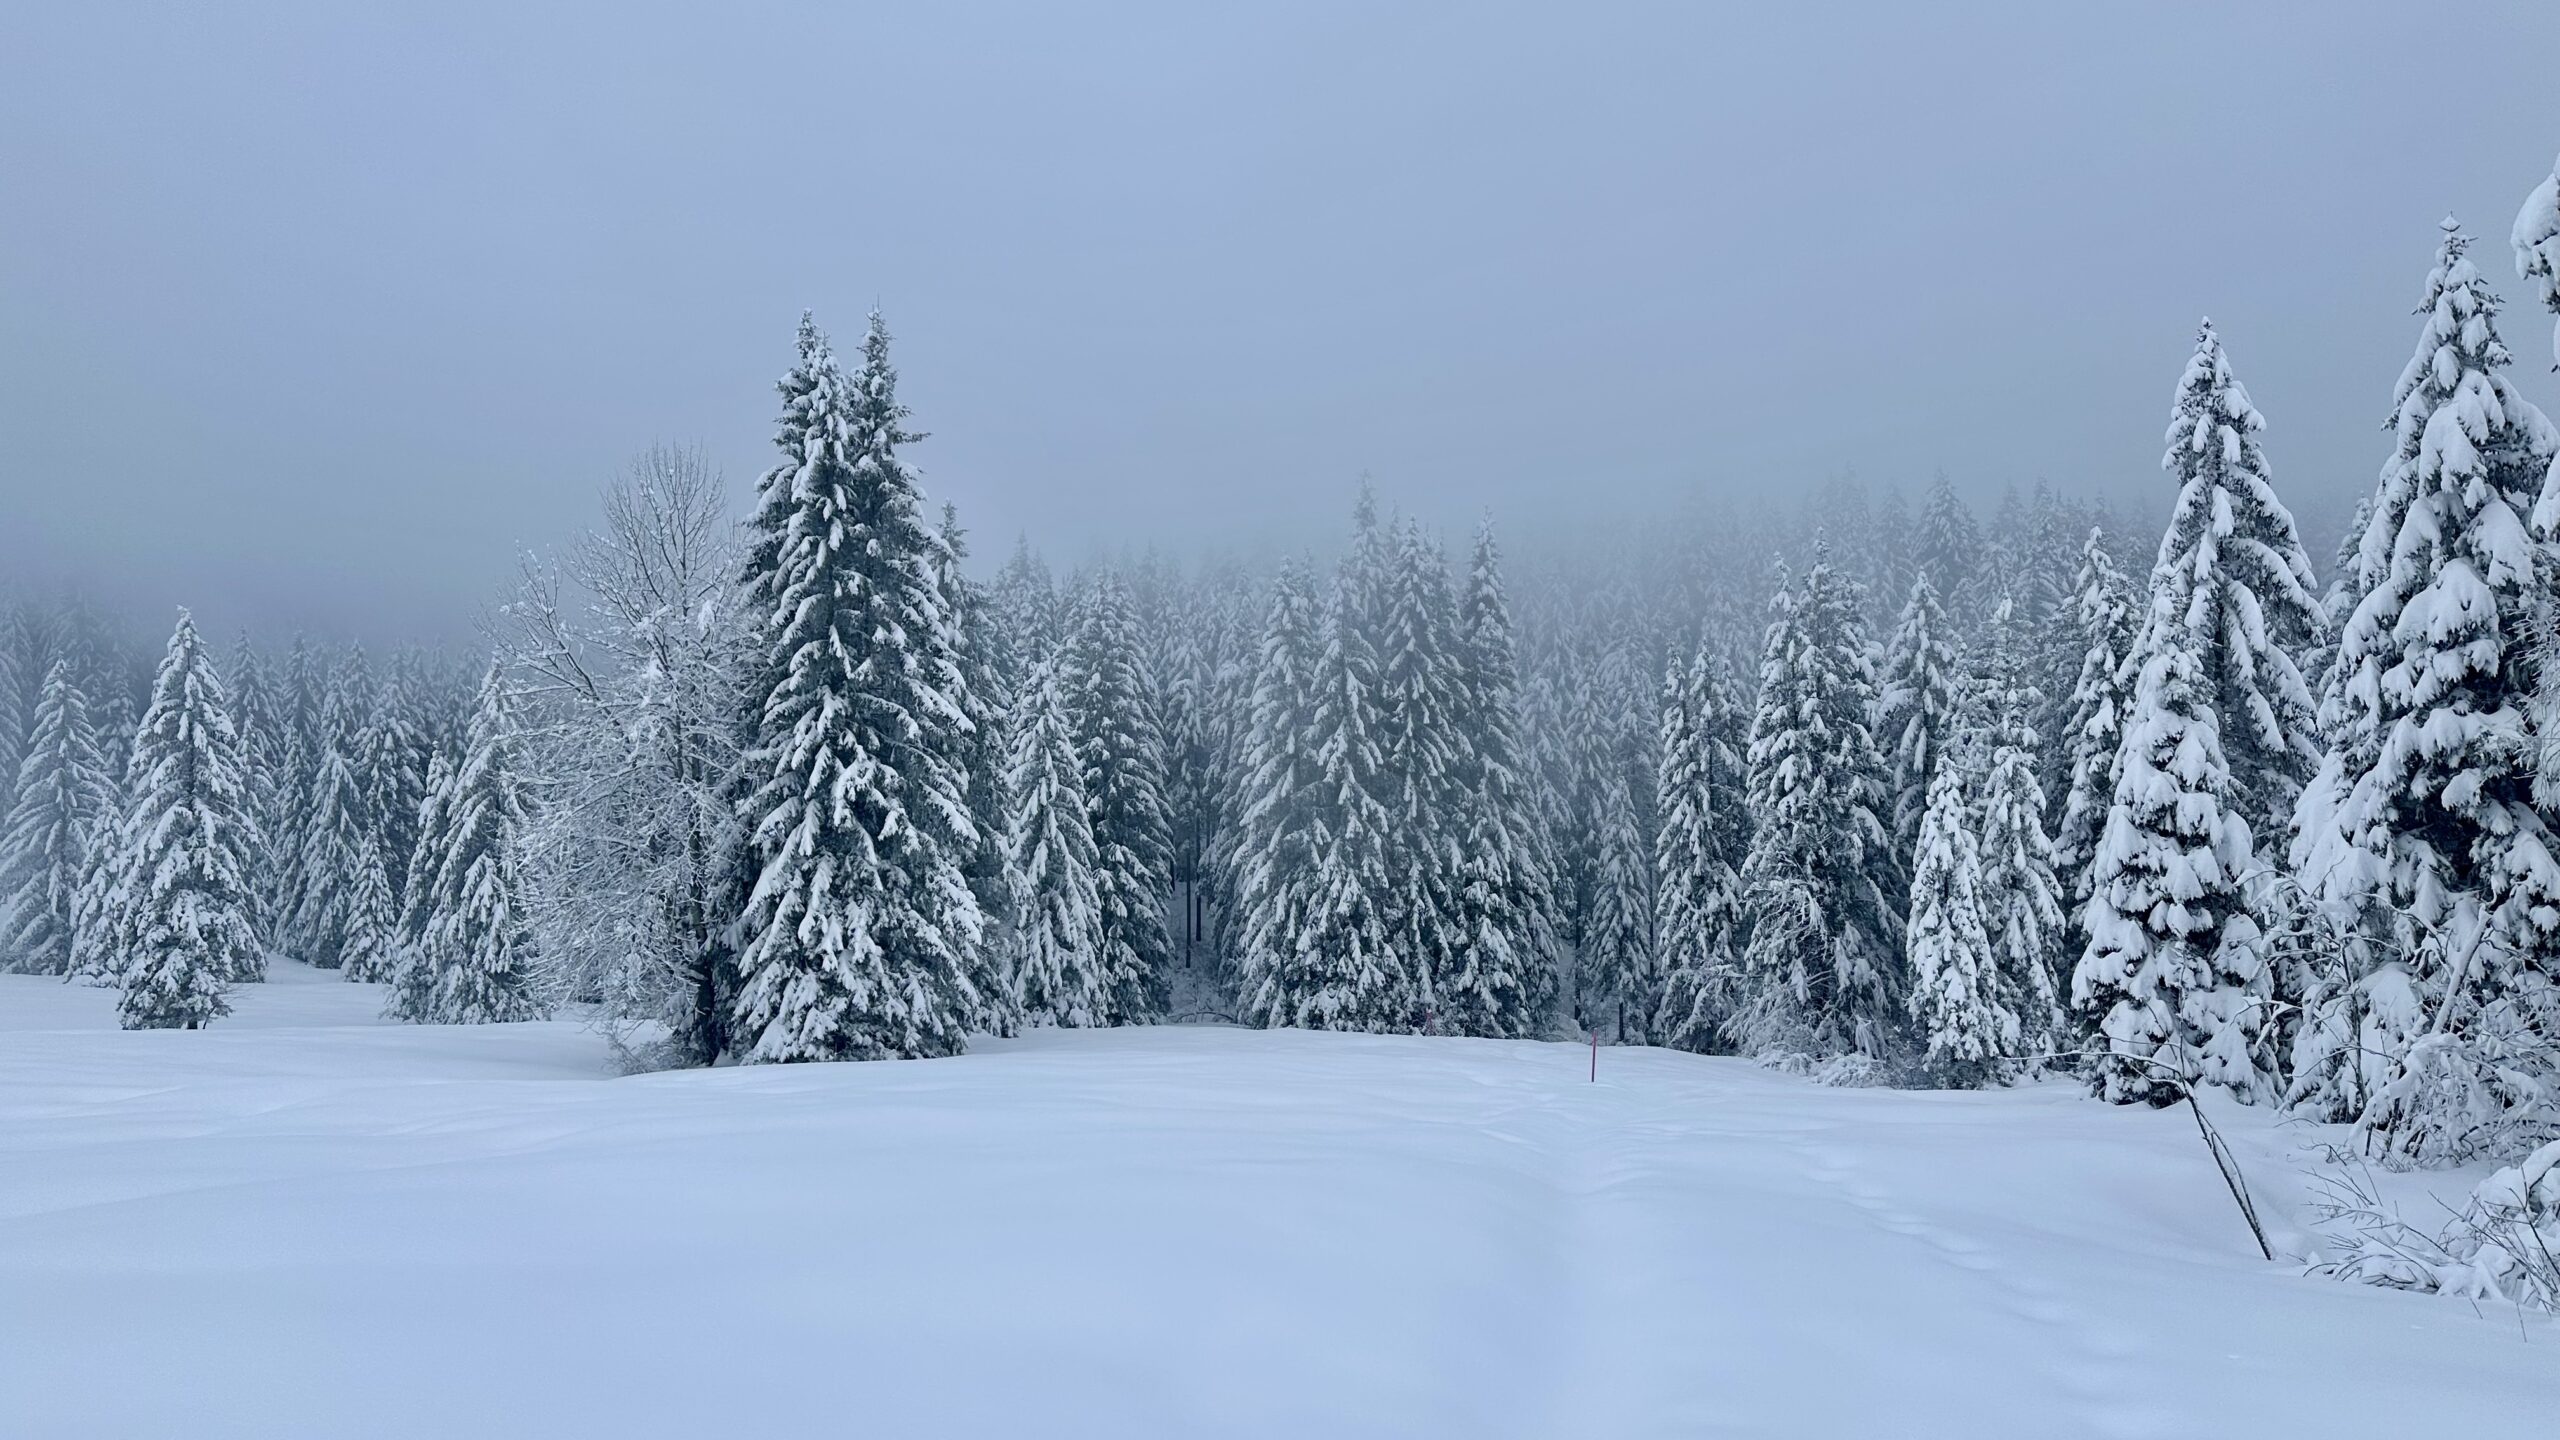 A snowy field bordered by conifer trees covered in snow on a foggy morning.